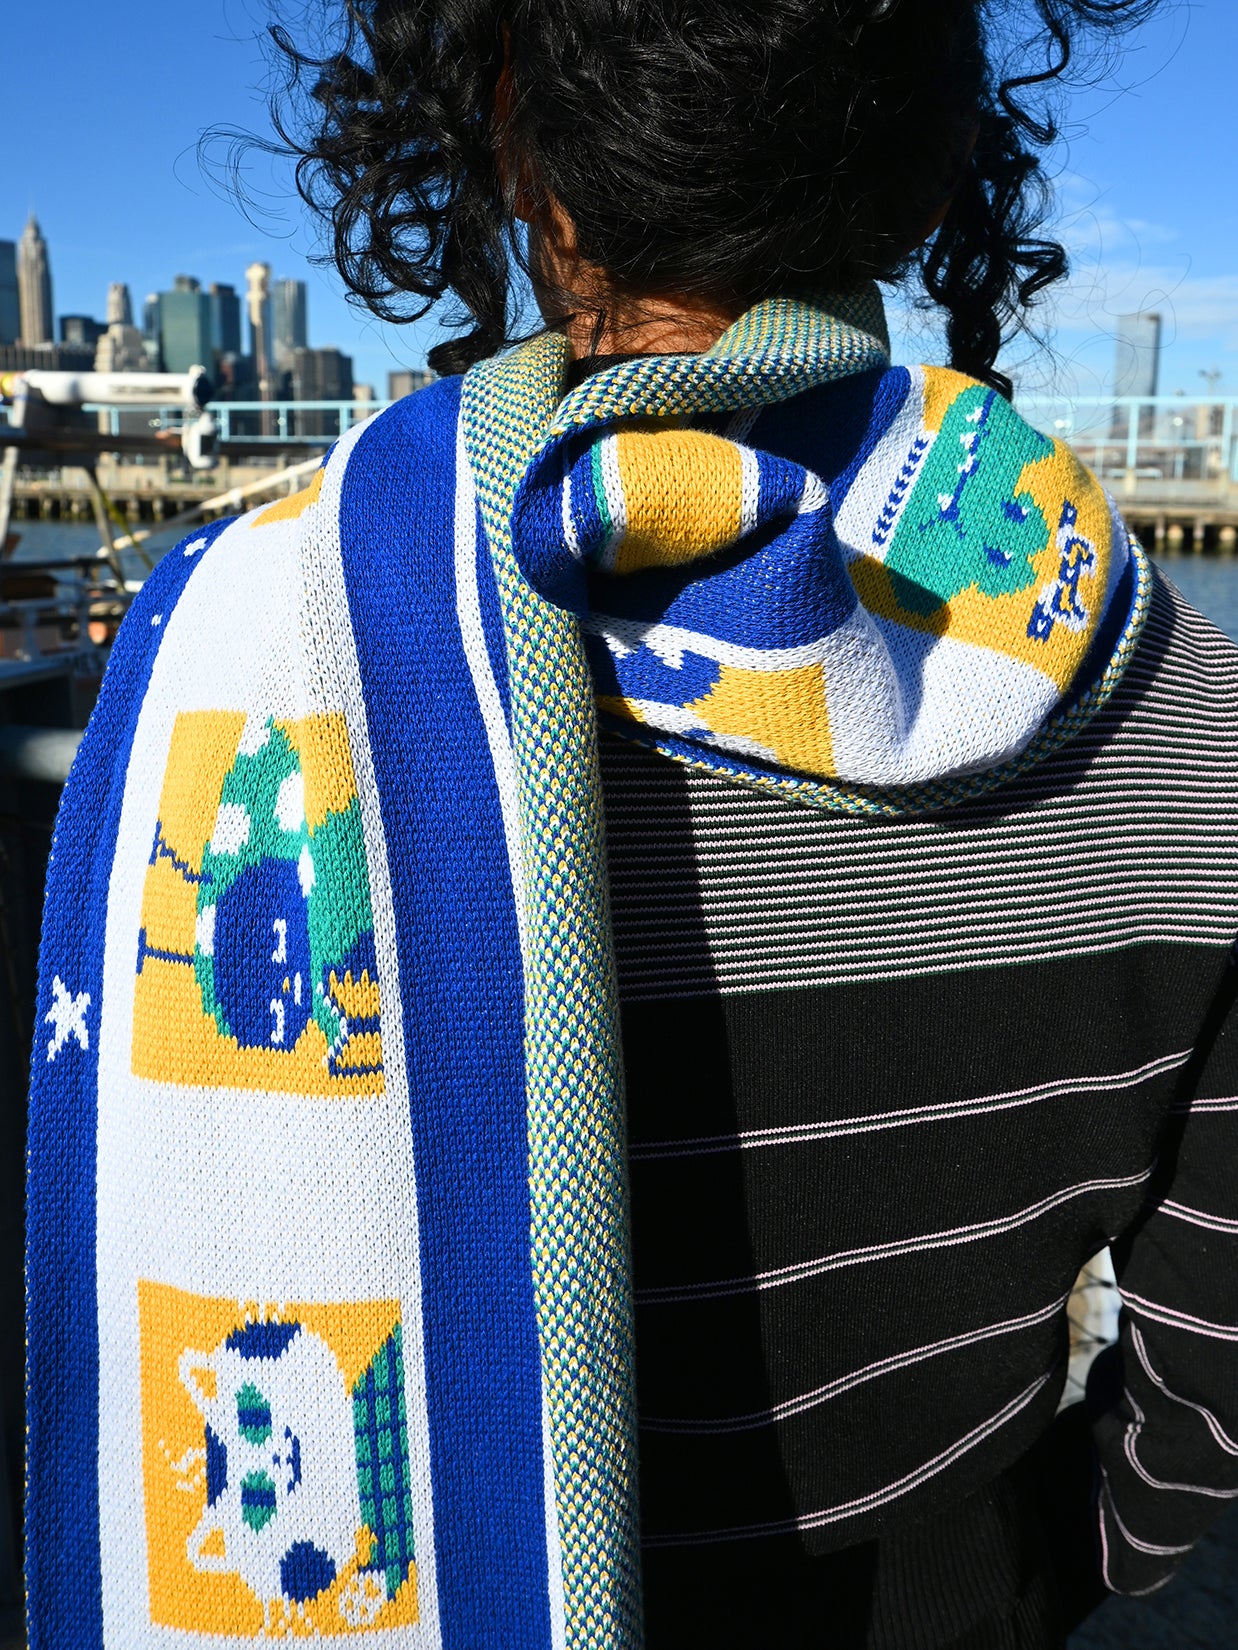 "The Passengers" Jumbo scarf -Design by Natali Koromoto. Inspired by travels on the Japanese Shinkansen bullet train. Scarf knit in Long Island, New York. 50/50 Rec. Poly + Rec. Cotton.